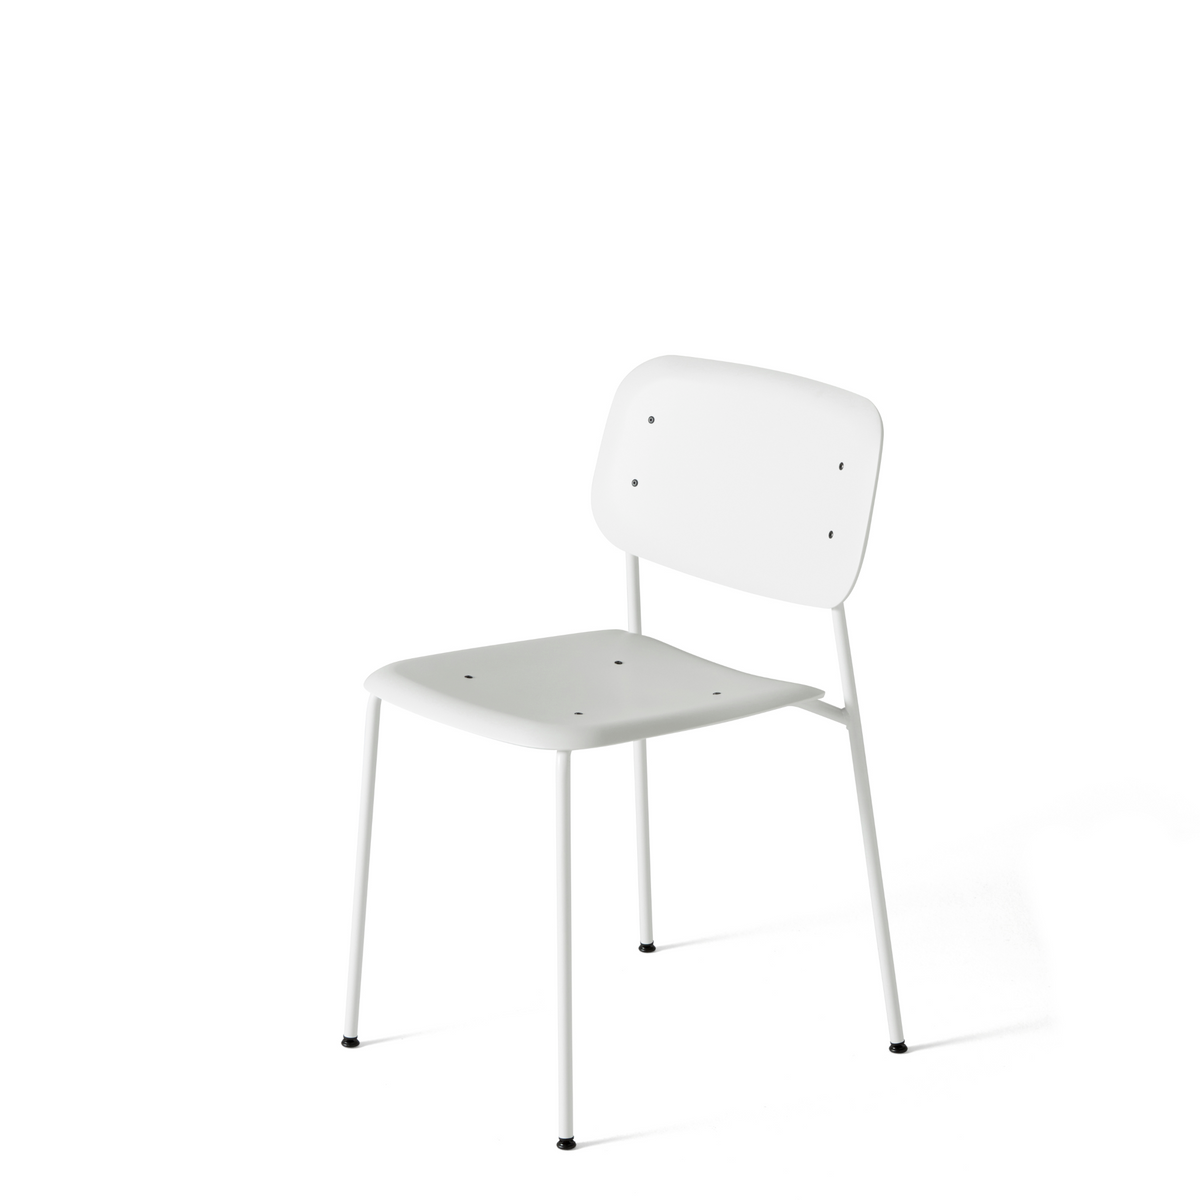 Pair of Soft Edge P10 Stackable Chairs